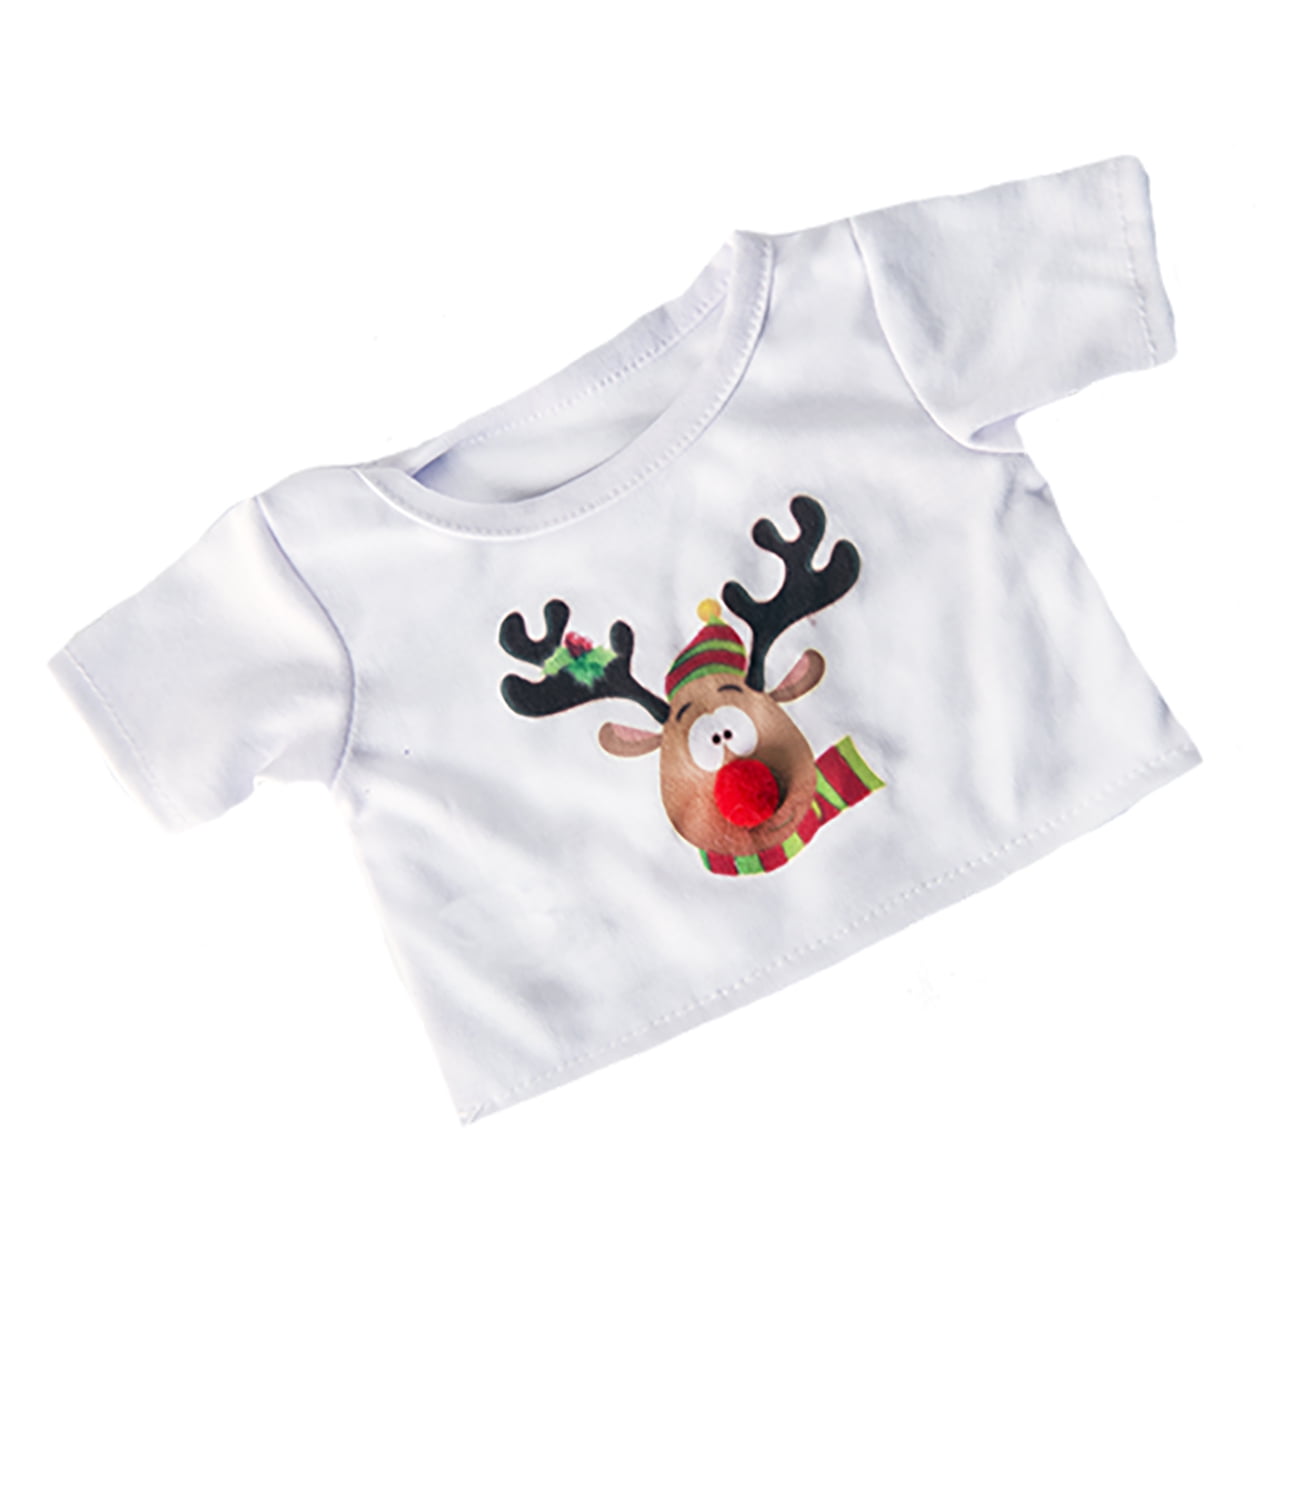 Reindeer T-Shirt Fits Most 14-18 Your Own Stuffed Animals 